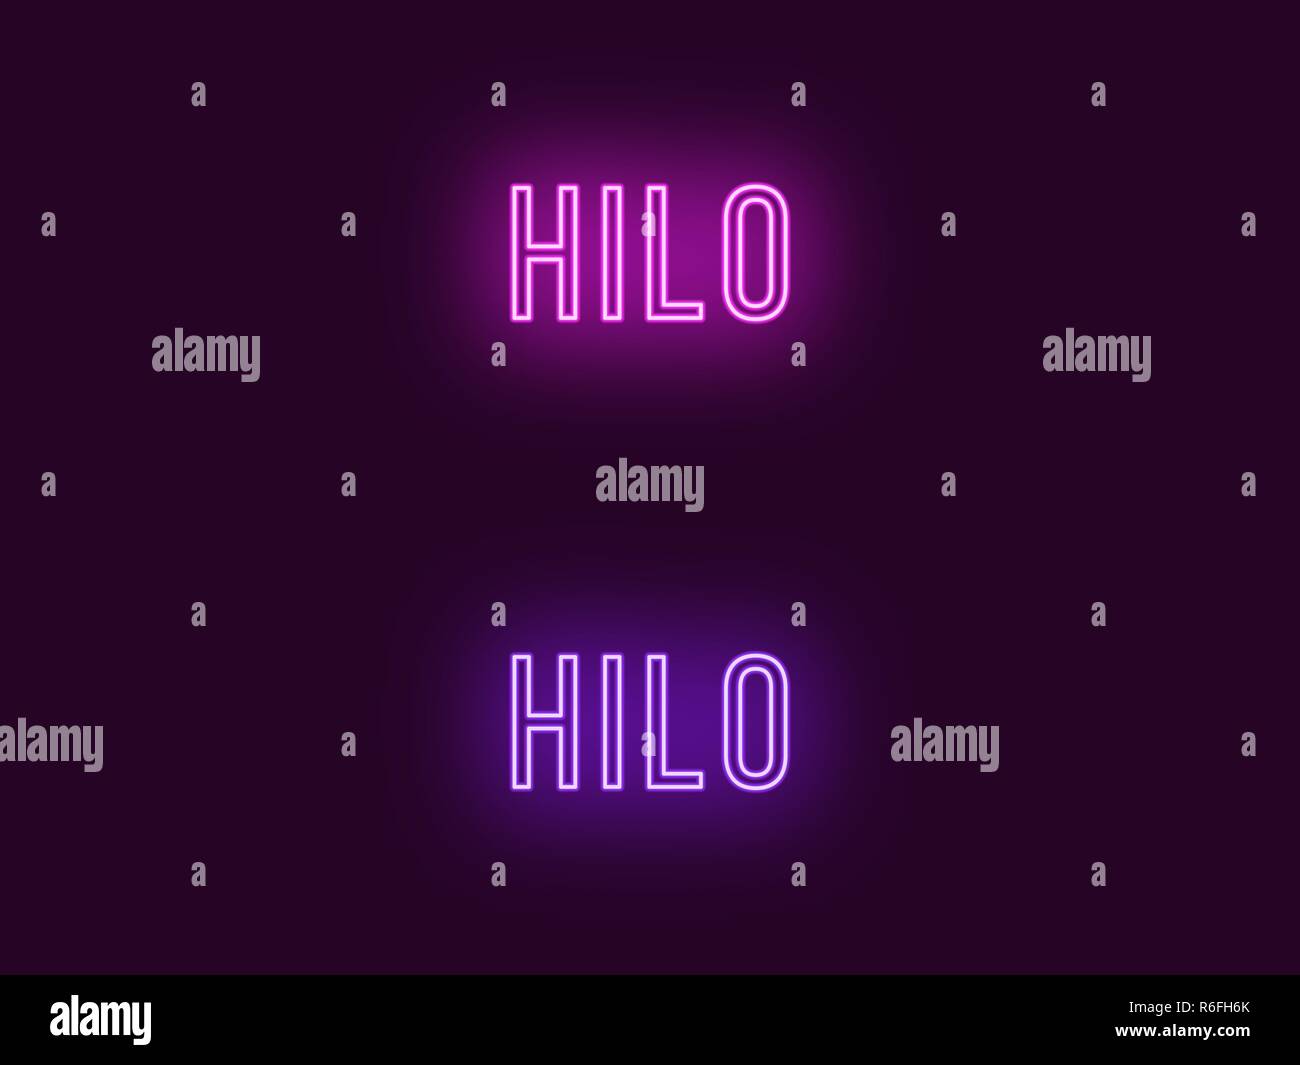 Neon name of Hilo city in Hawaii. Vector text of Hilo, Neon inscription with backlight in Thin style, purple and violet colors. Isolated glowing title Stock Vector